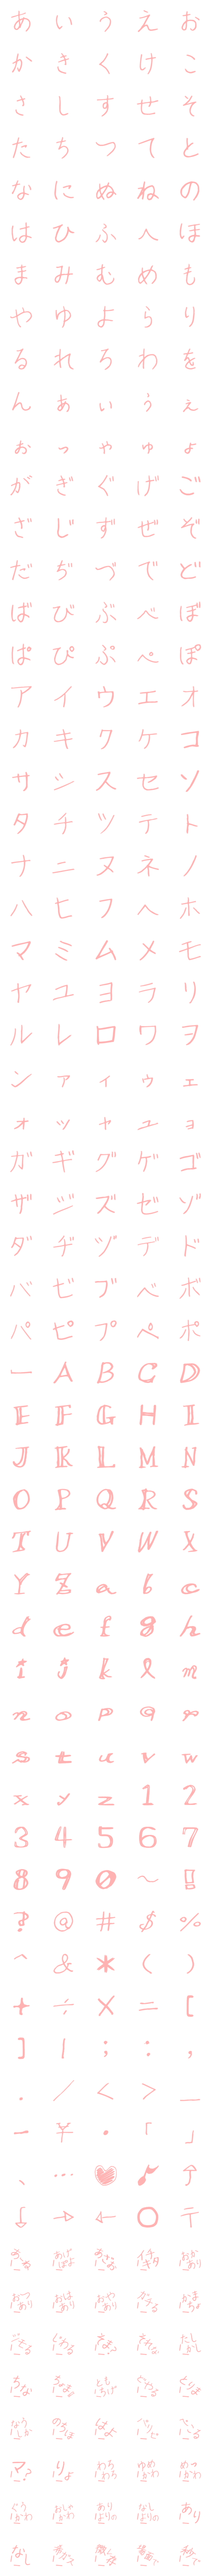 [LINE絵文字]SALMONPINK文字 絵文字の画像一覧